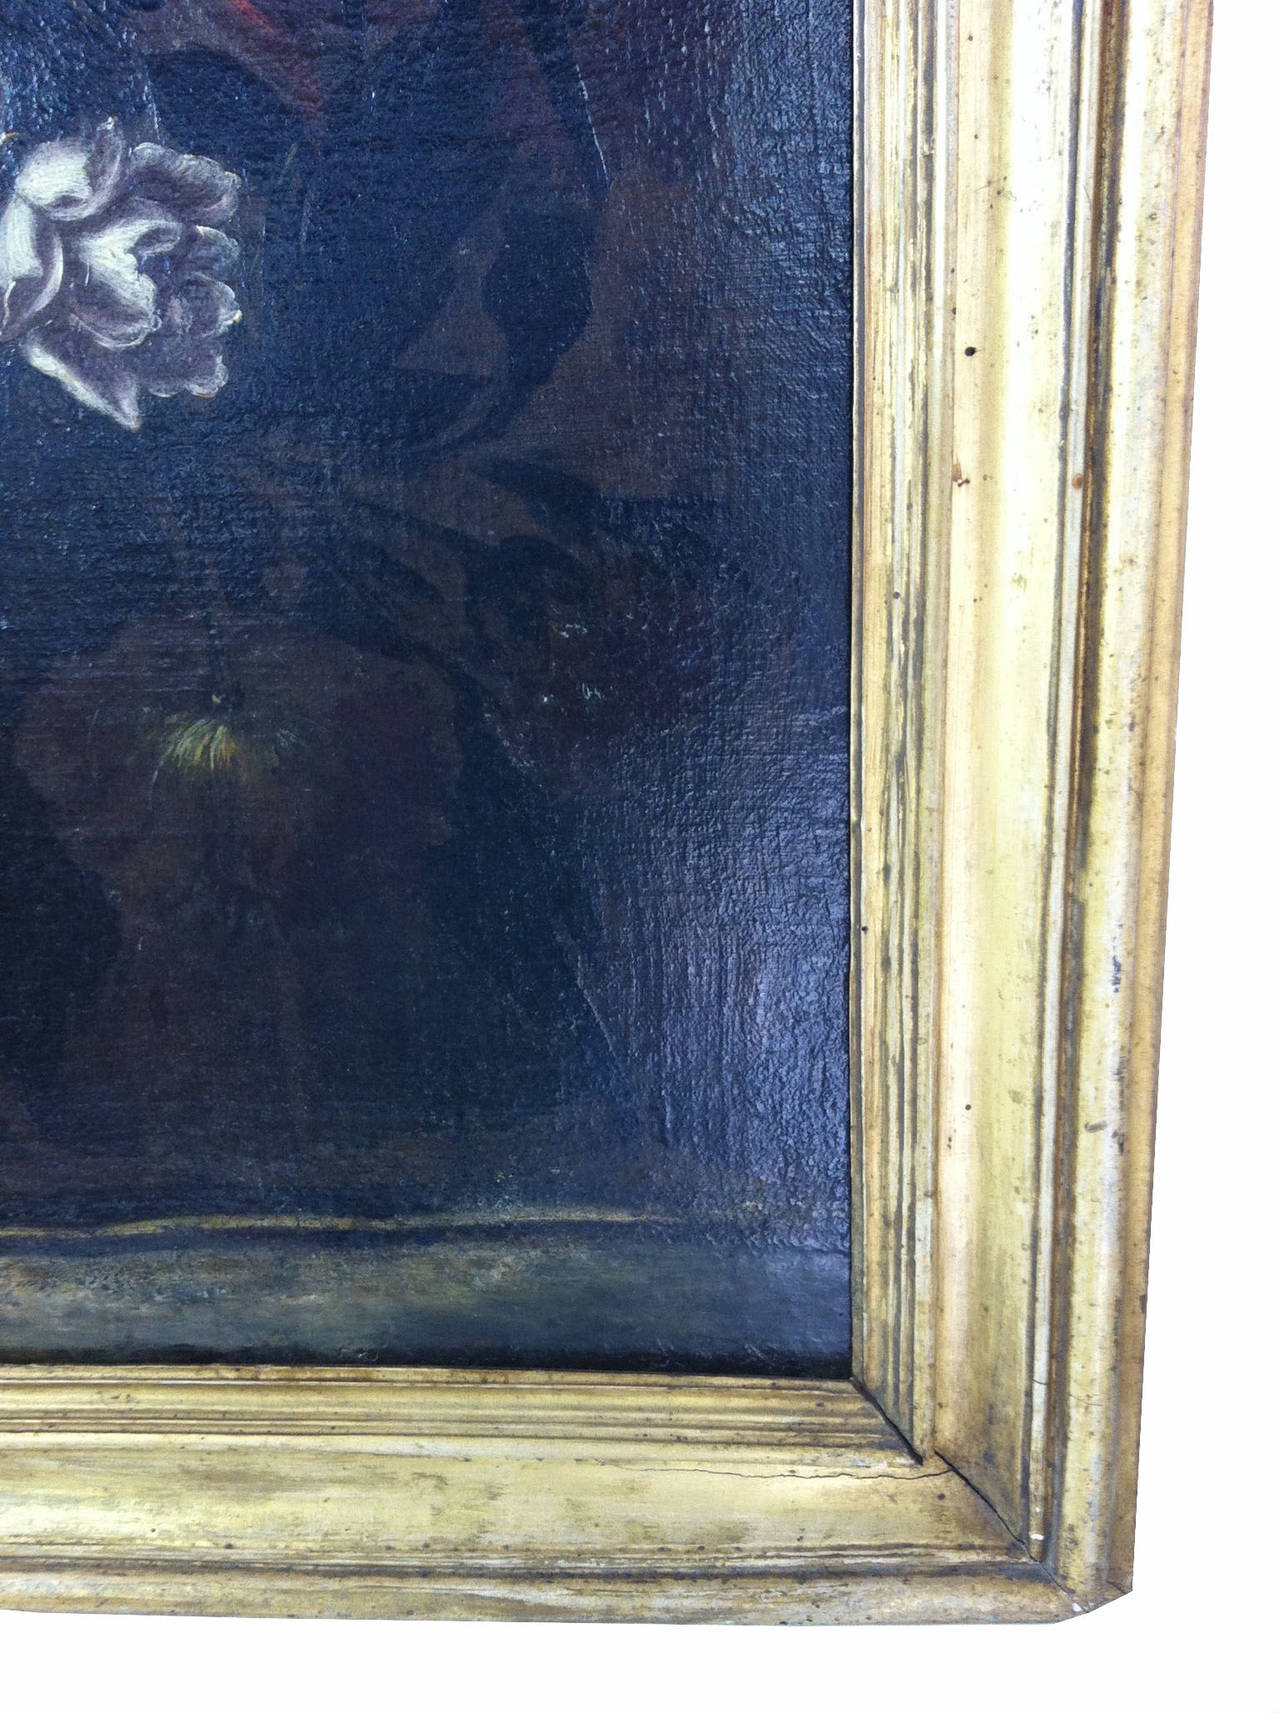 Oil on canvas with floral subject, done in a muted palette, with highlights of red orange, pale blue and grey.  Exquisite detail on flowers and vase. Original Gilt wood frame.